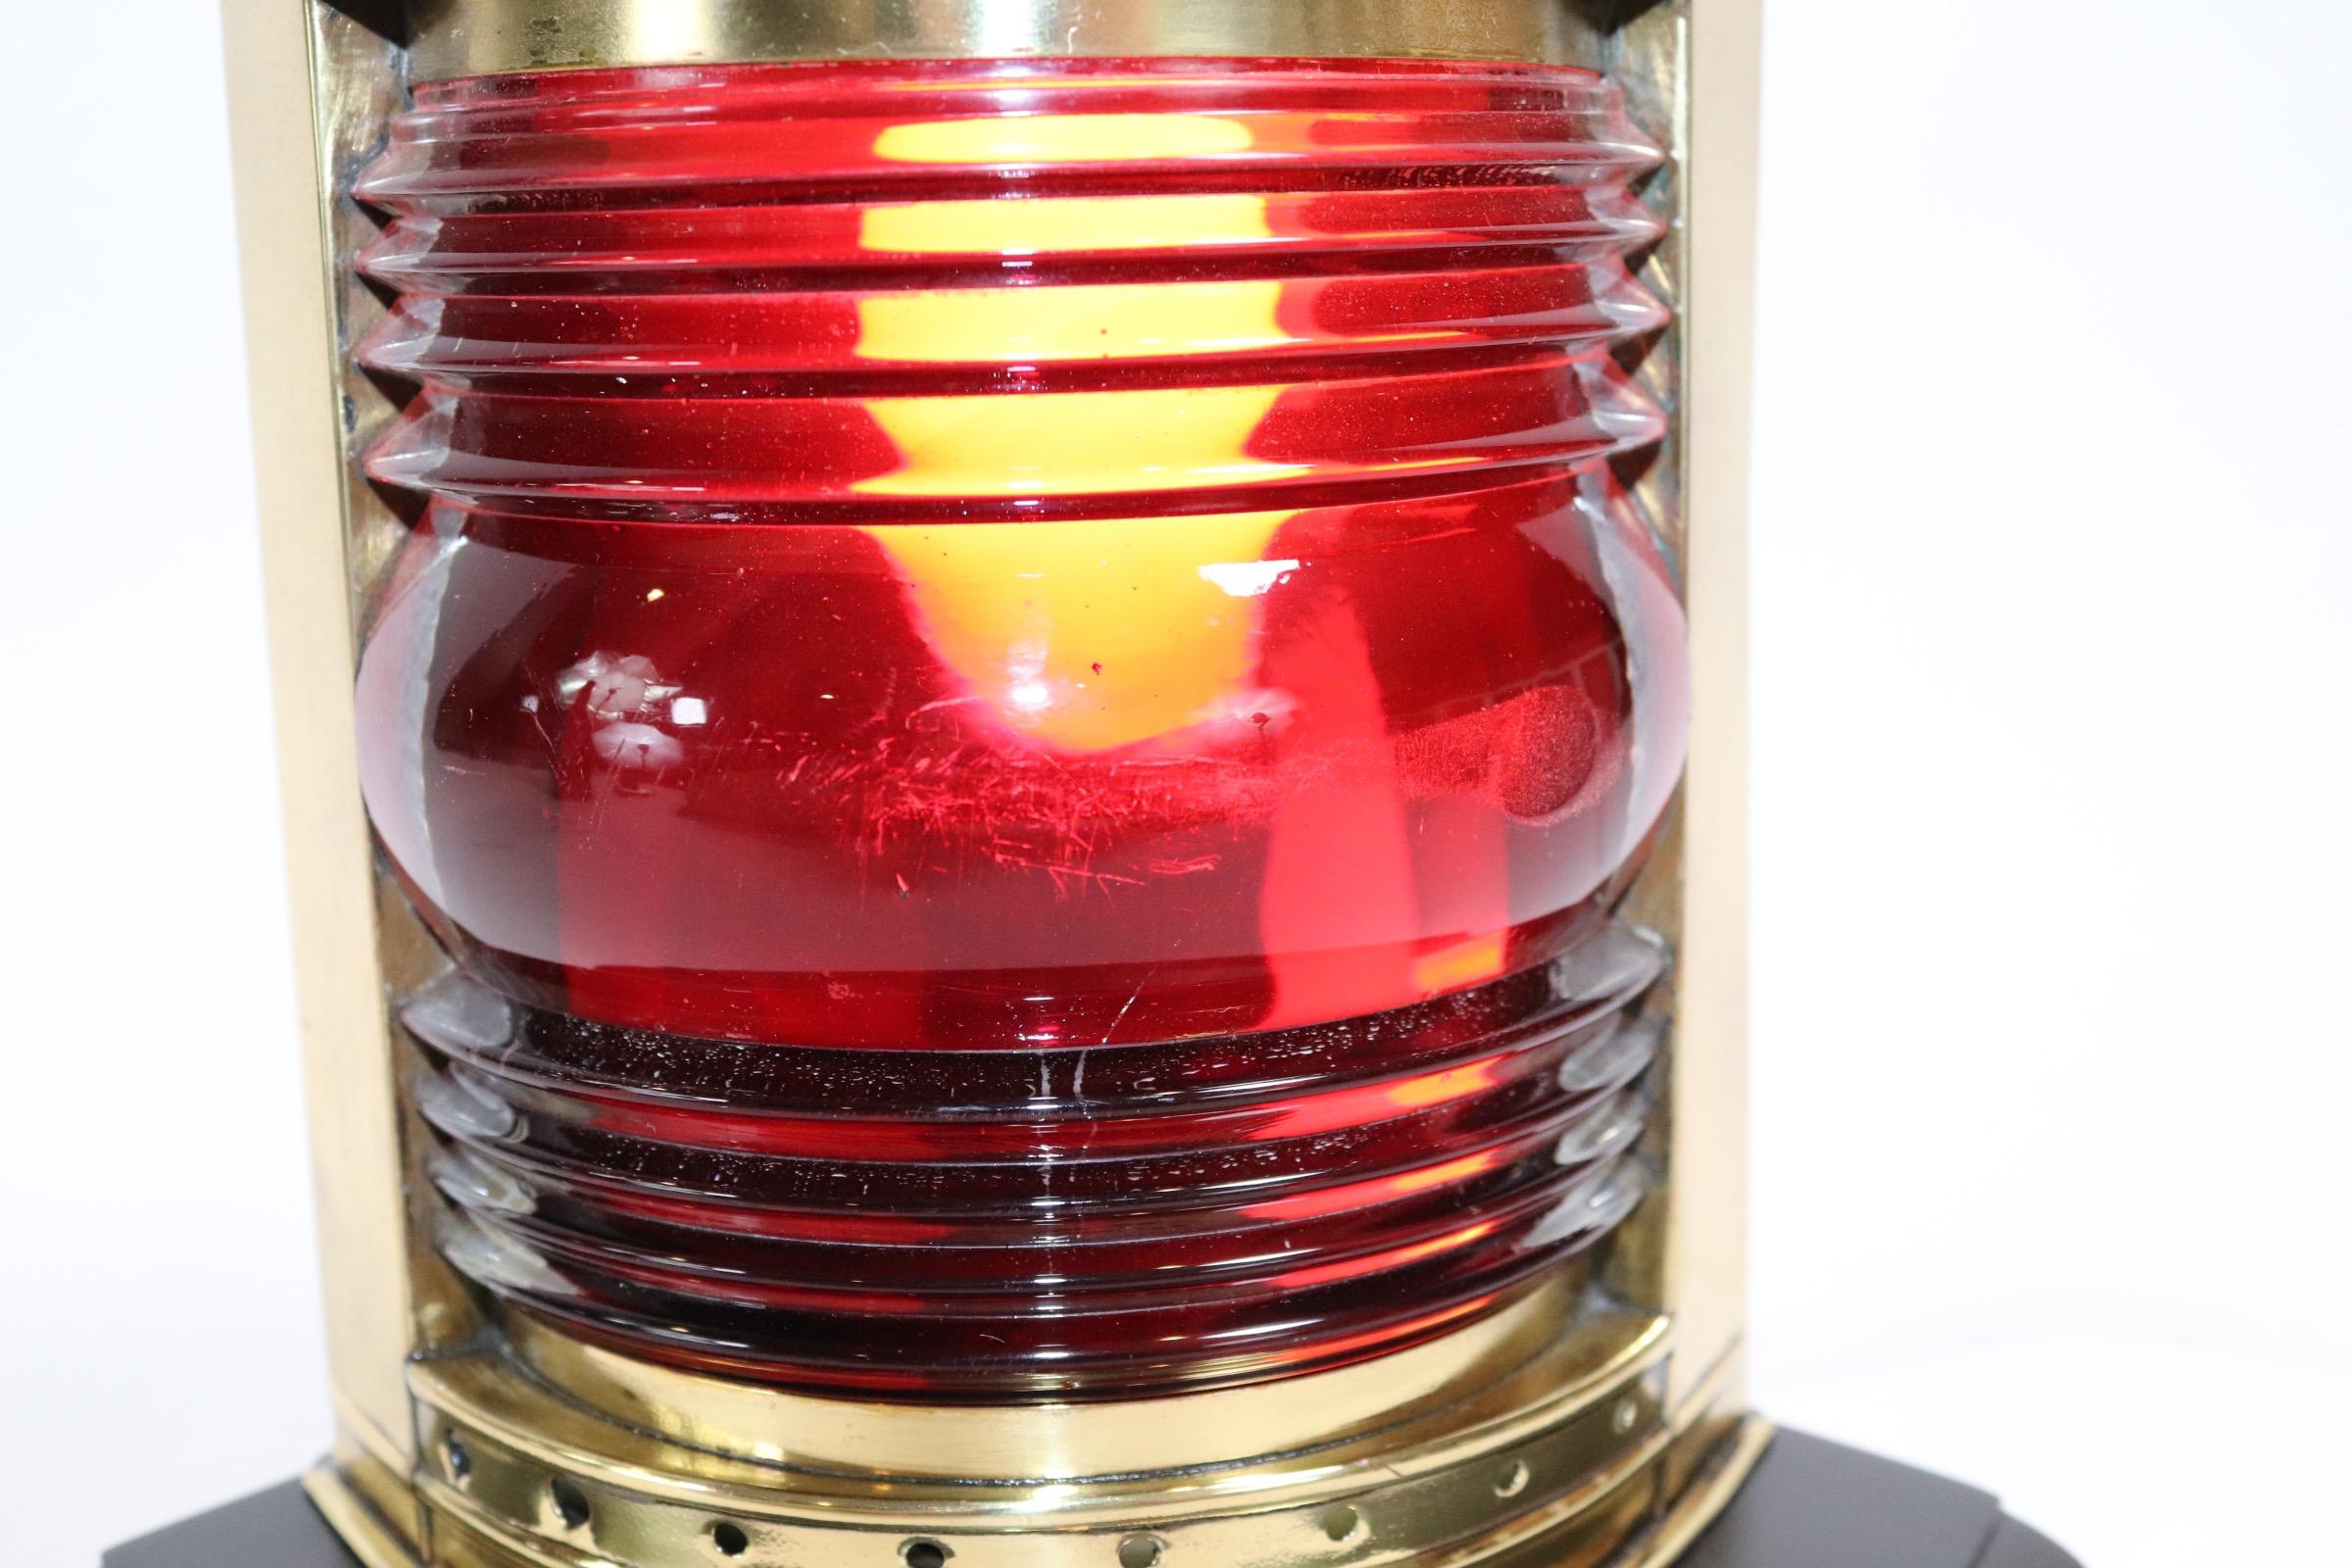 Polished and lacquered ships port lantern with rich red lens mounted to a custom wood base with rich dark finish. Weight is 3 pounds.